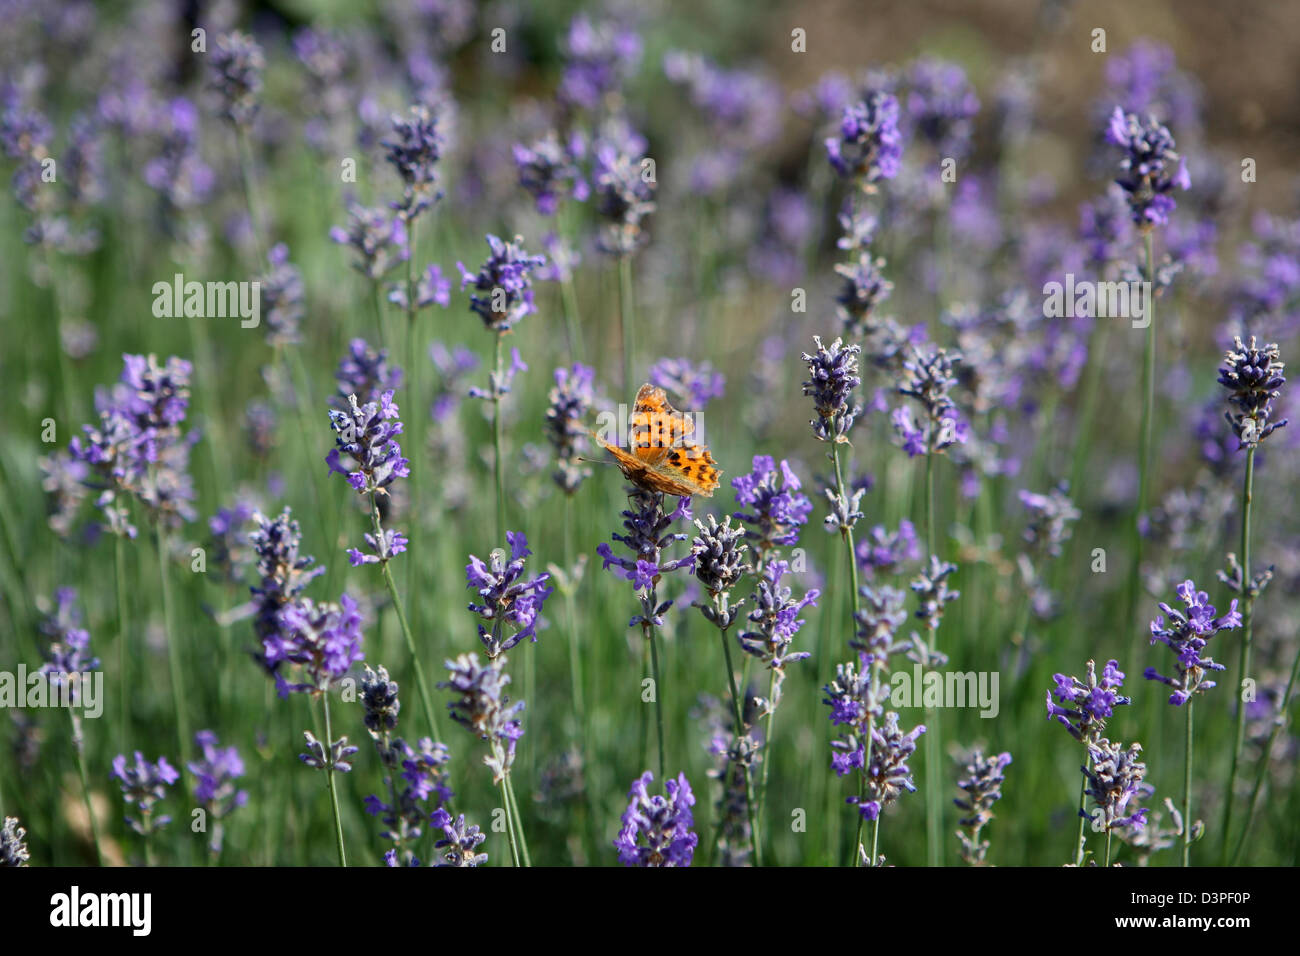 Comma butterfly resting or feeding on English lavender flowers Stock Photo